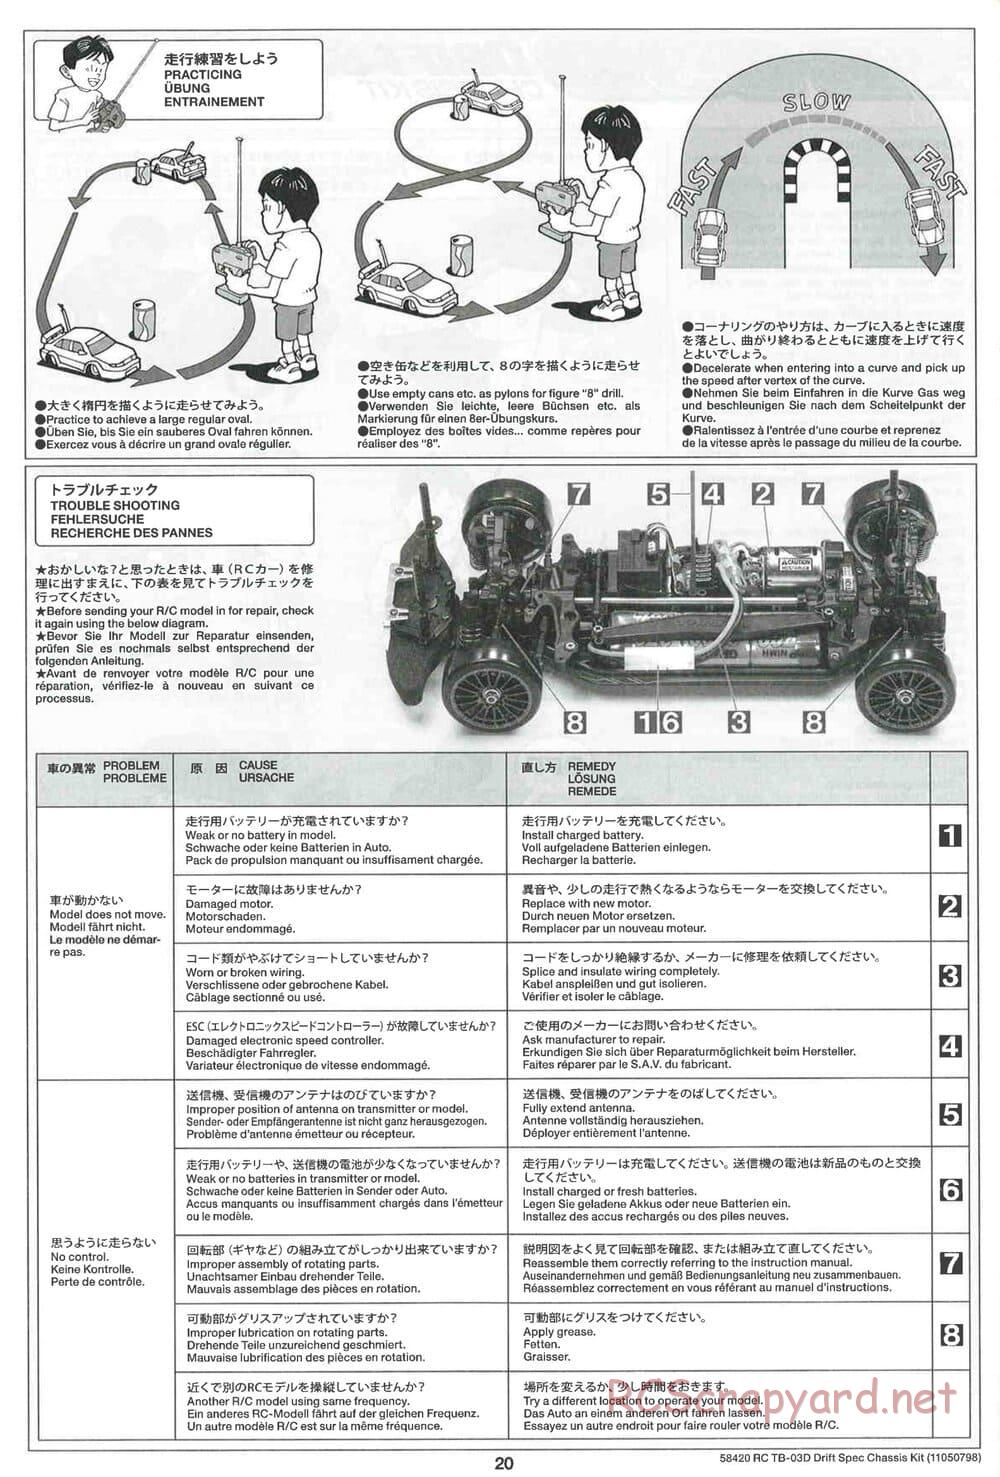 Tamiya - TB-03D HP Drift Spec Chassis - Manual - Page 20